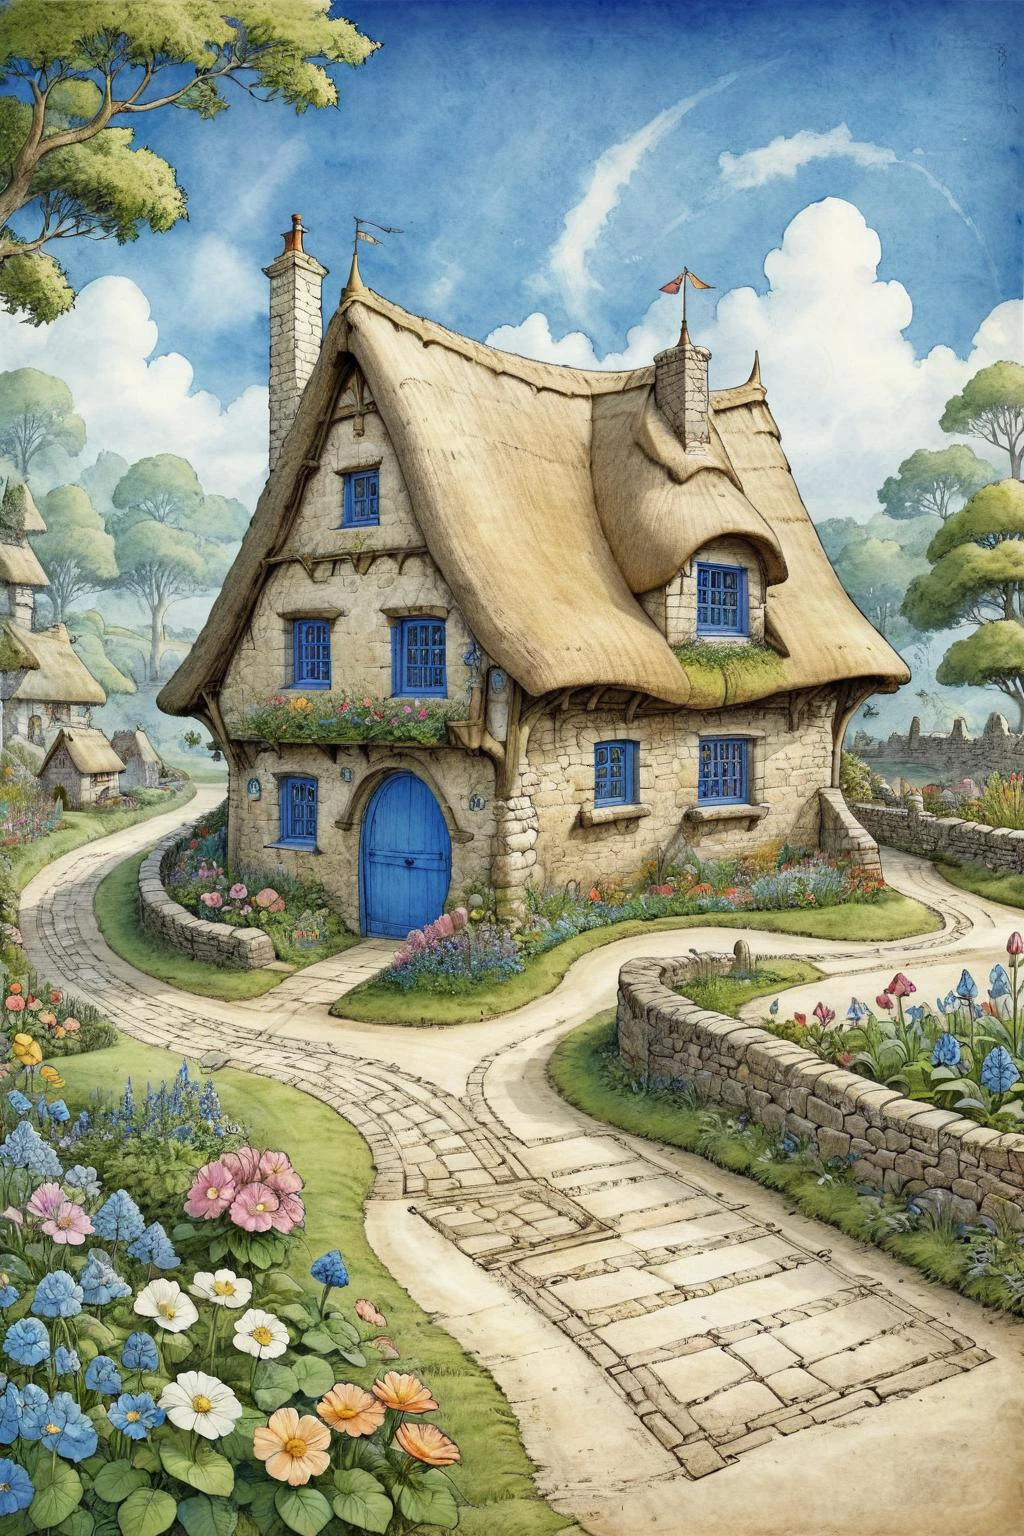 ON PARCHMENT,INK ILLUSTRATION,bl3uprint,A detailed blueprint for the construction of an elf garden,a fairy-tale thatched house,a large number of flowers,a flower border,a stone road,a low bridge,